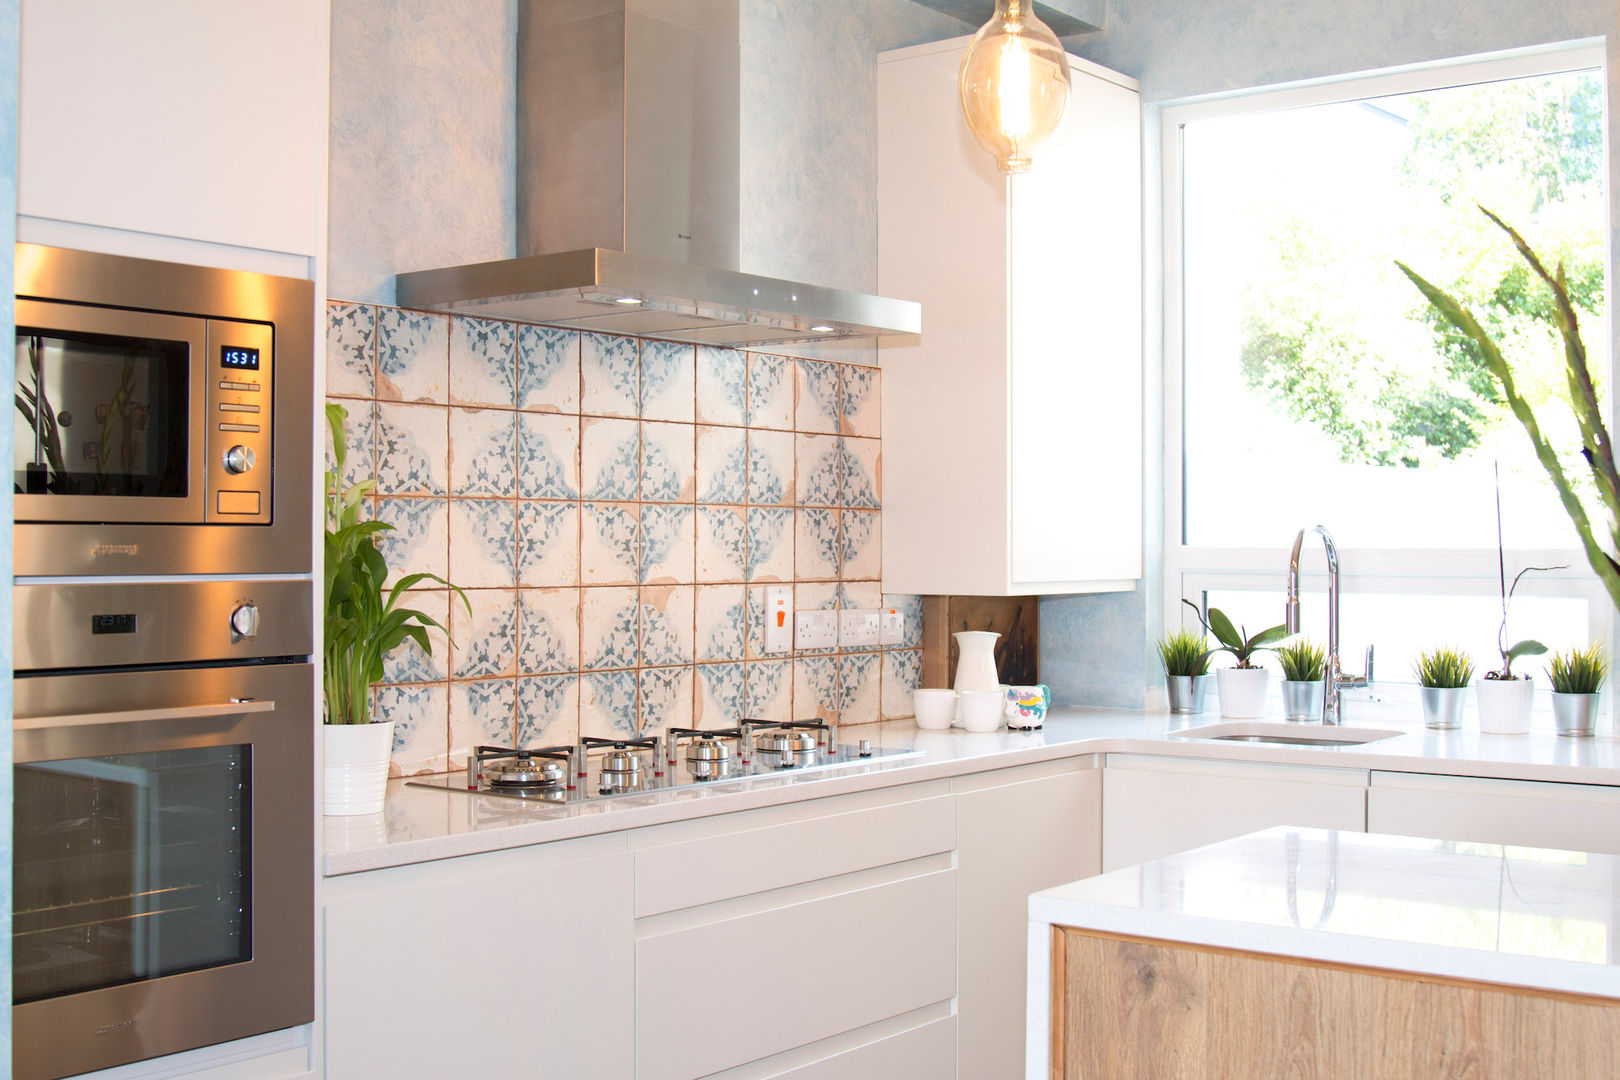 We love pattern homify Built-in kitchens Wood Wood effect patterned tiles,stone worktops,modern worktops,quirky kitchen